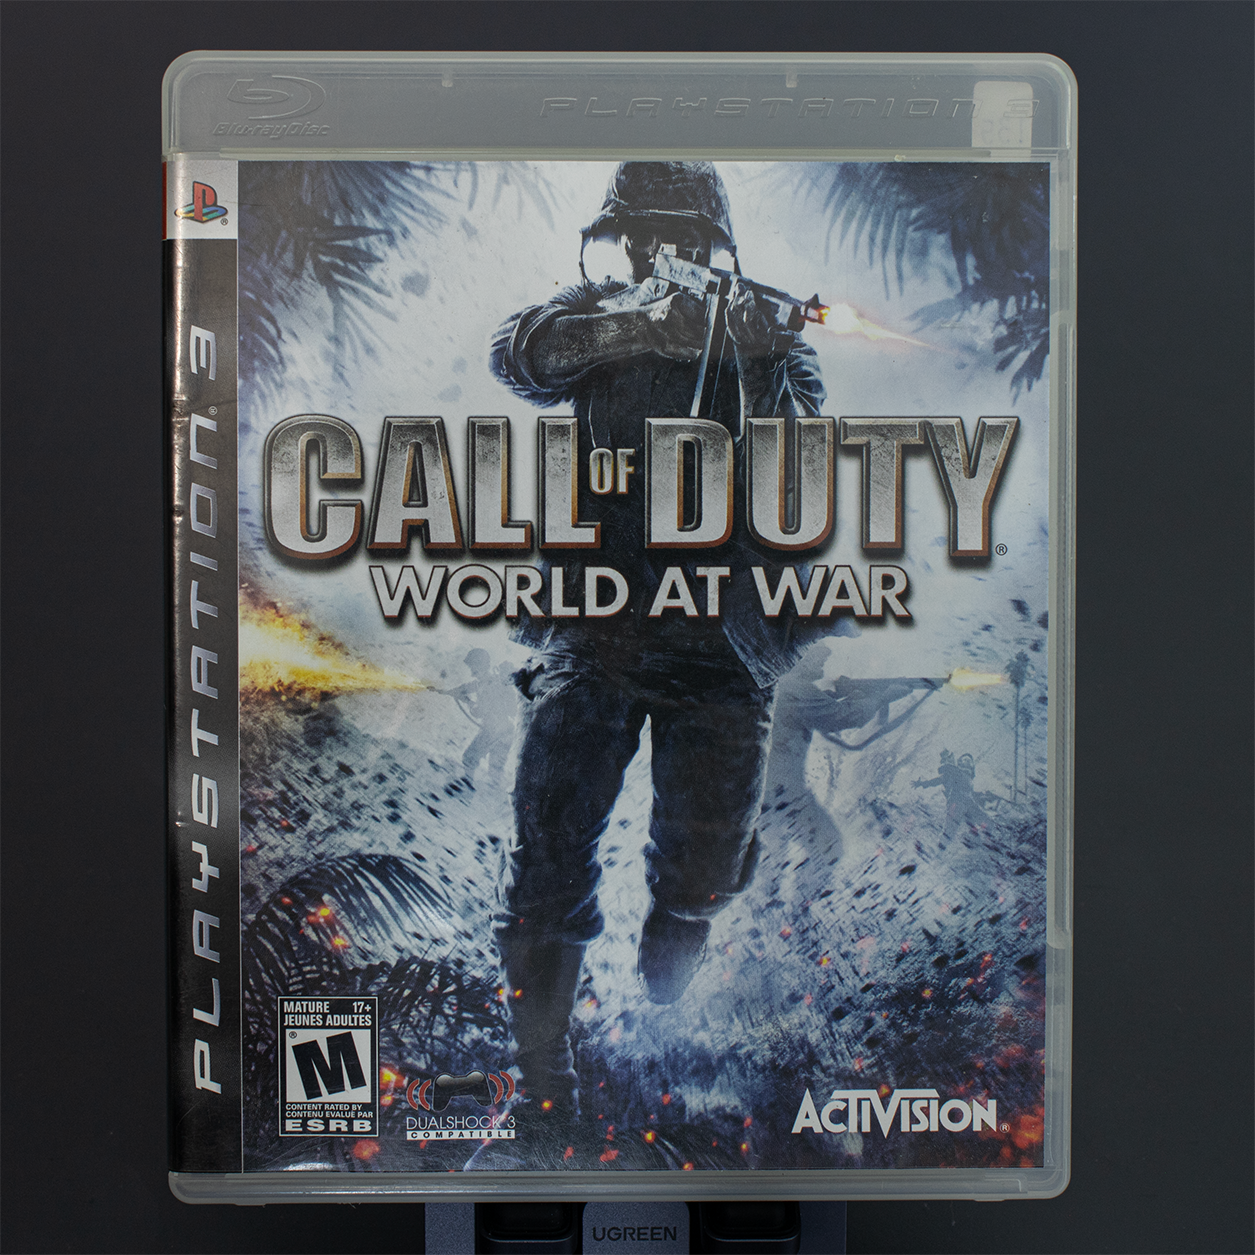 Call of Duty World at War - PS3 Game